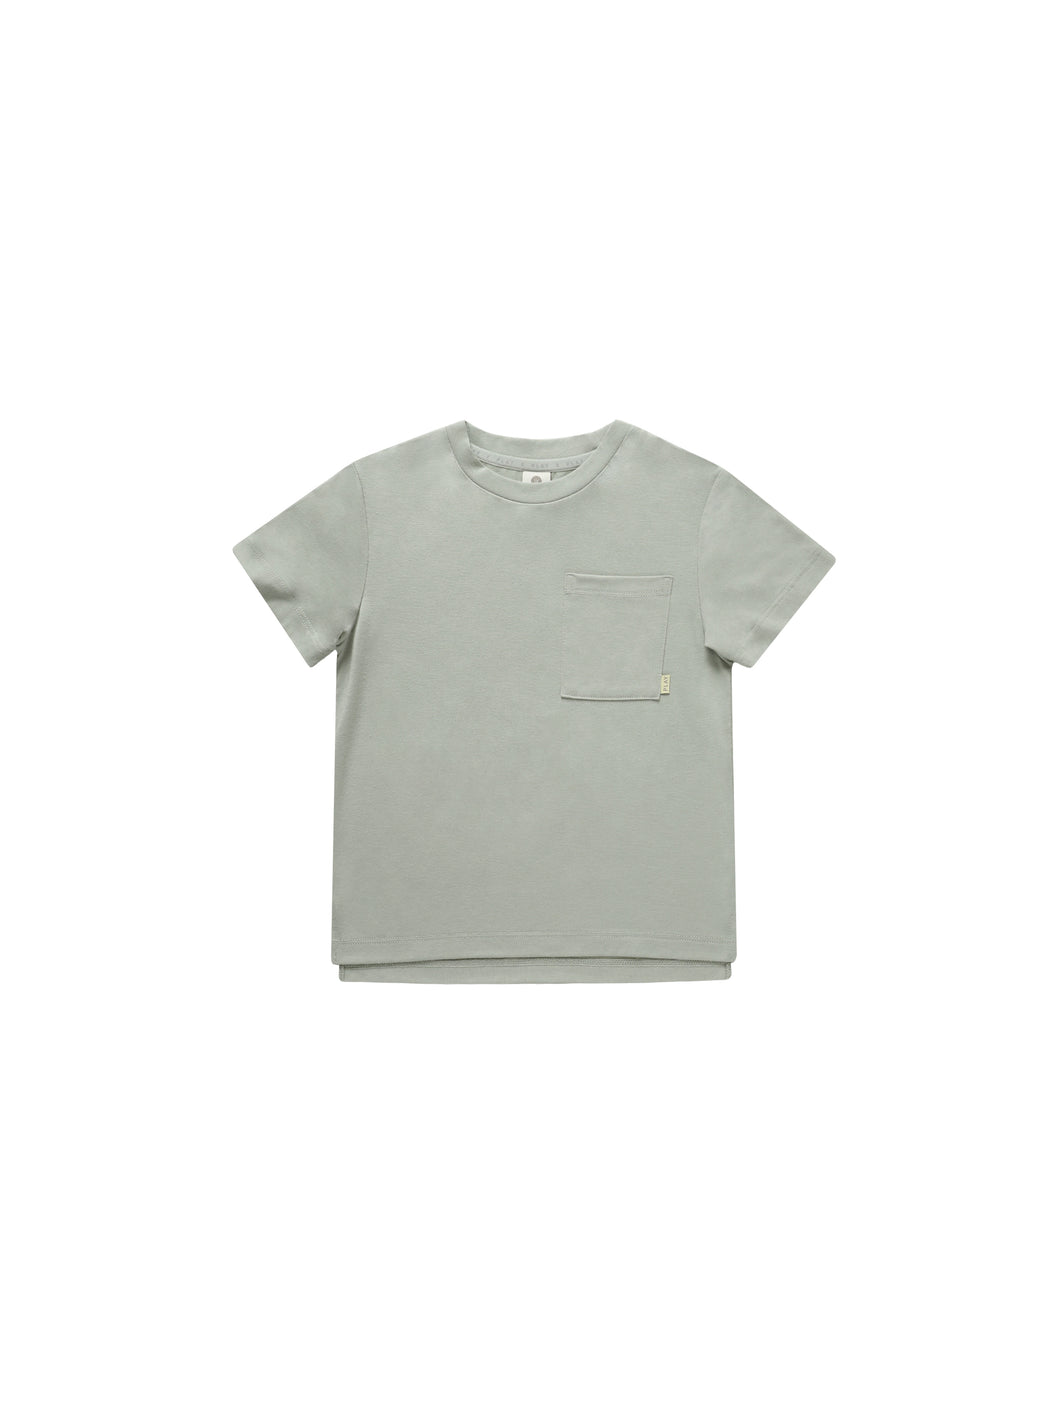 Pocket tee featured in a pale teal colour. 